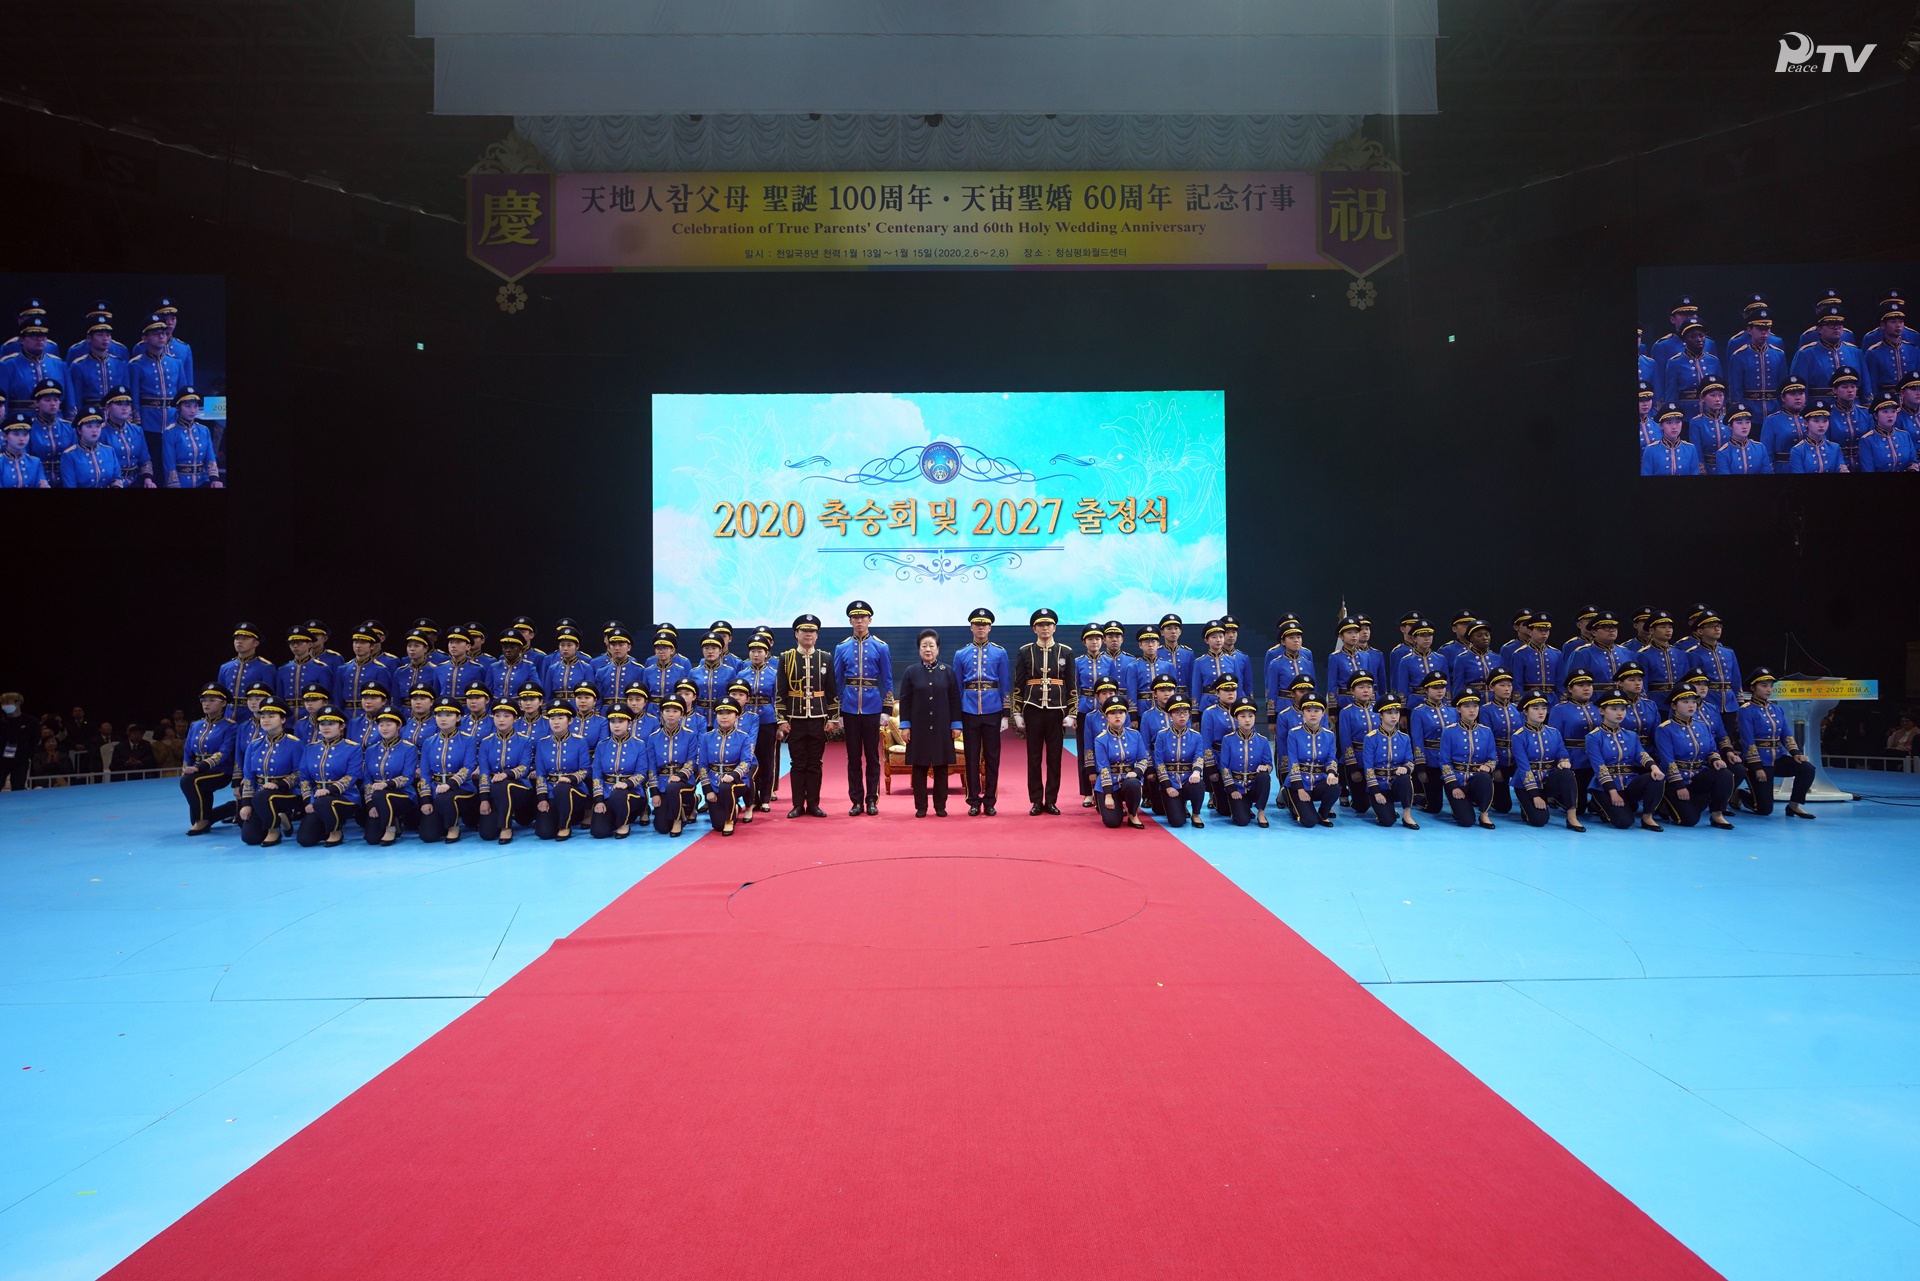 Victory Celebration for 2020 and Launch of 2027 Efforts(2020.2.8) The Cheongshim Center